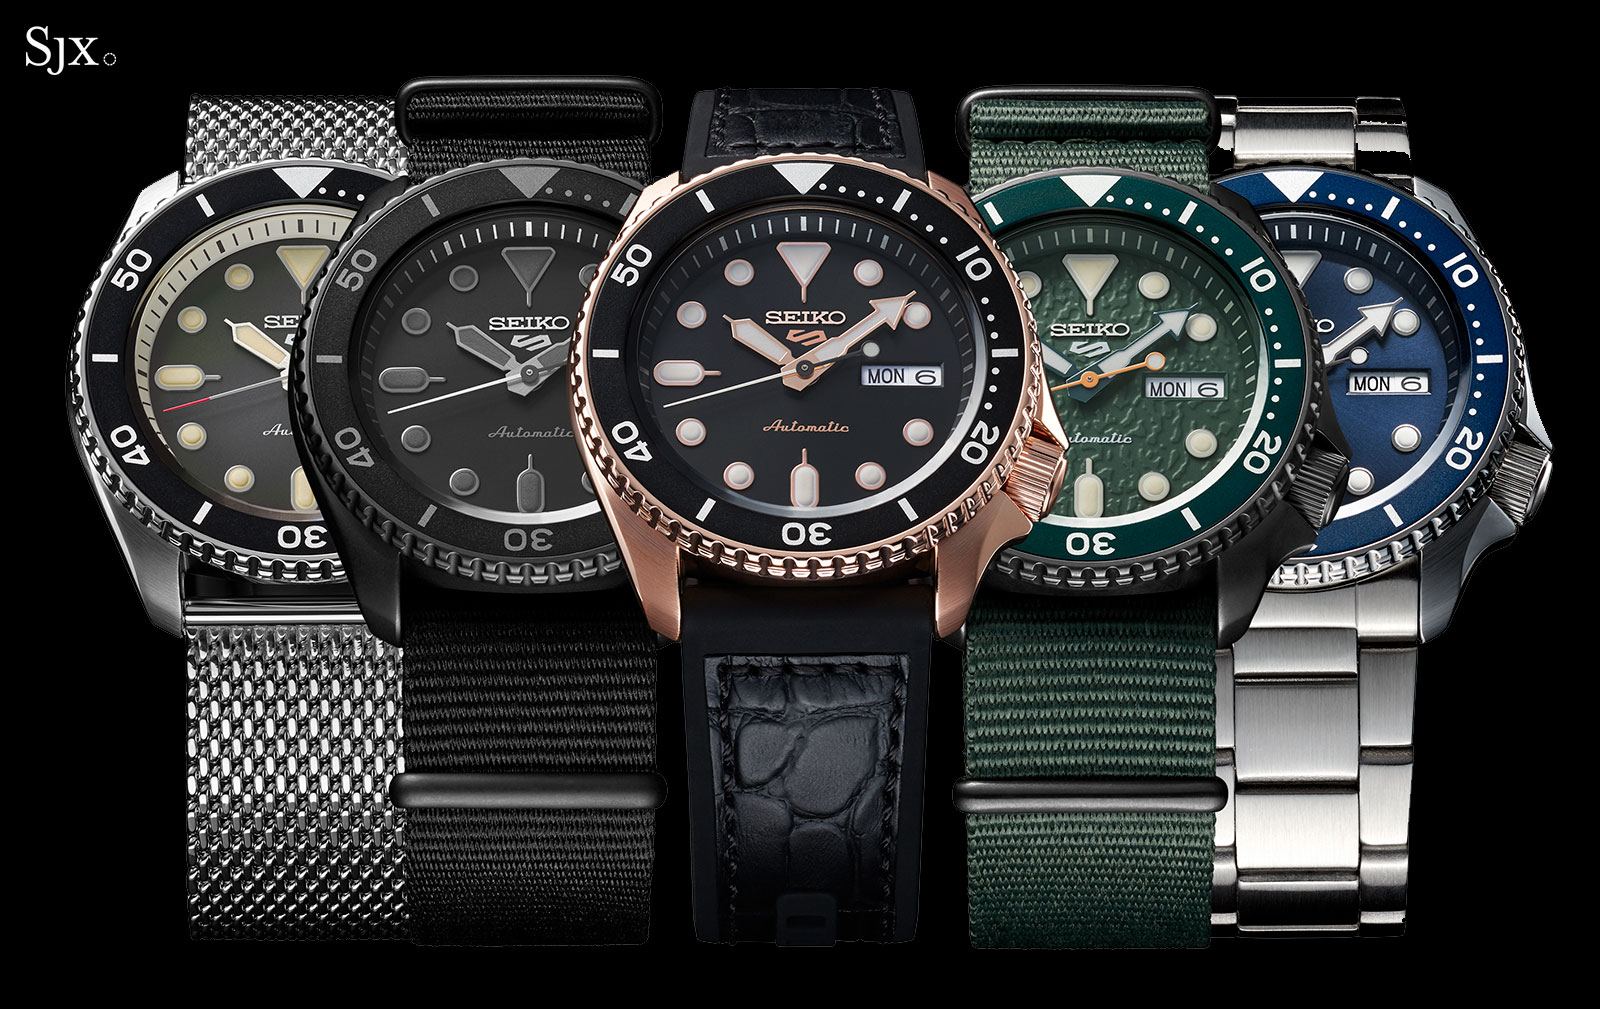 Introducing the New Seiko 5 Sports Collection | SJX Watches